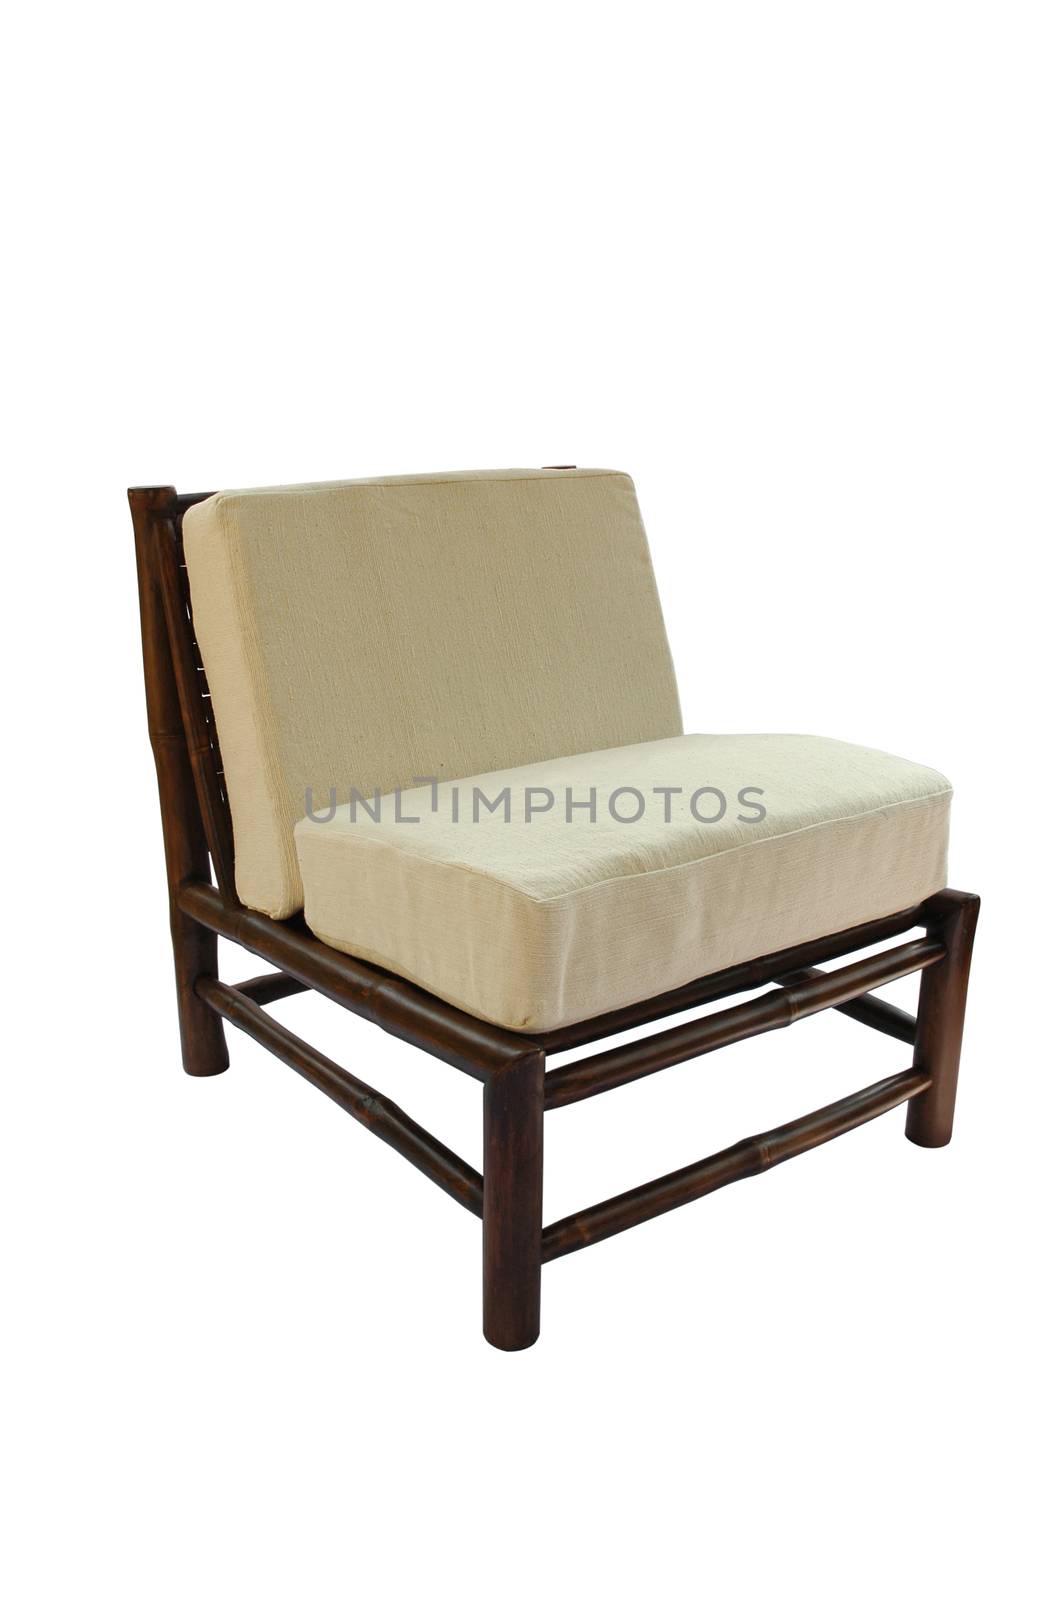 Bamboo chair with pillow  isolated by NuwatPhoto